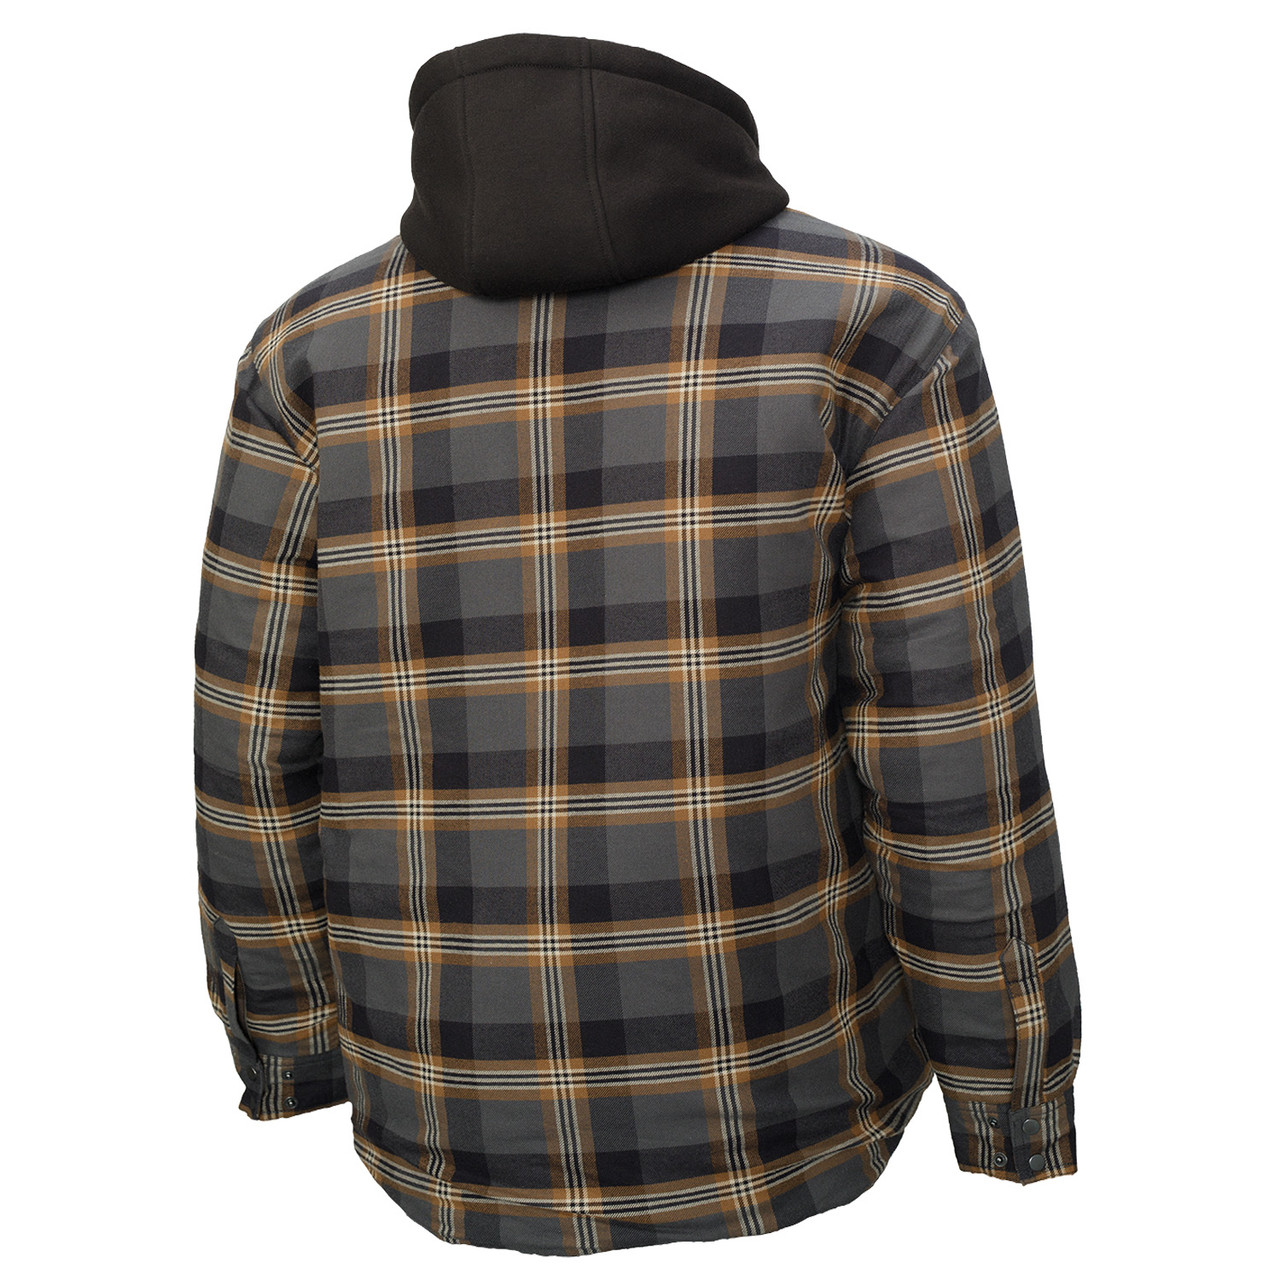 TOUGH DUCK QUILT LINED FLANNEL SHIRT - Mucksters Supply Corp